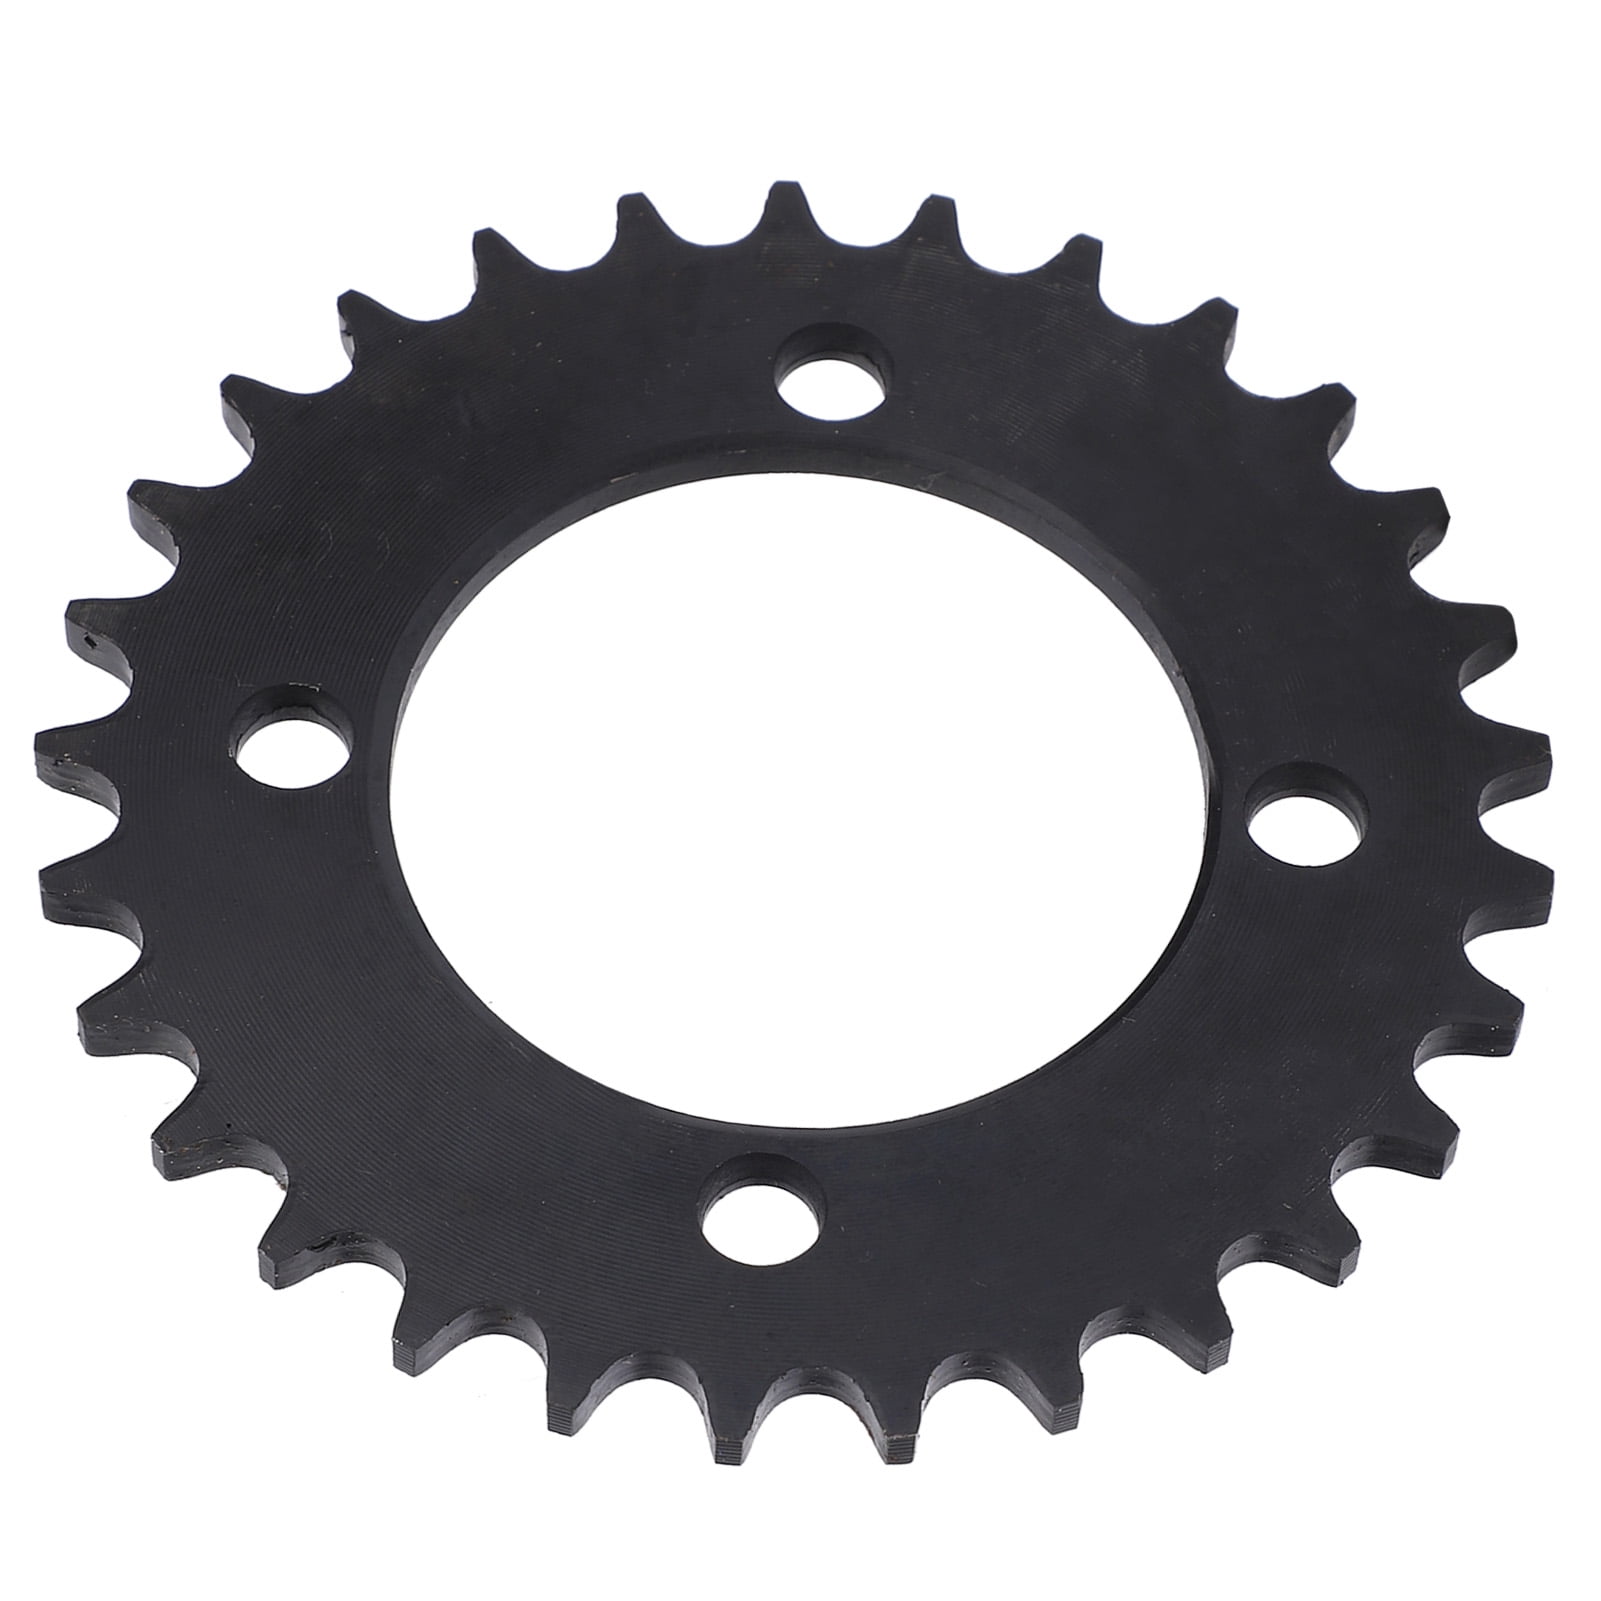 Bicycle gears Steel Sprocket 3Pcs Electric Bike Replacement Convenient 